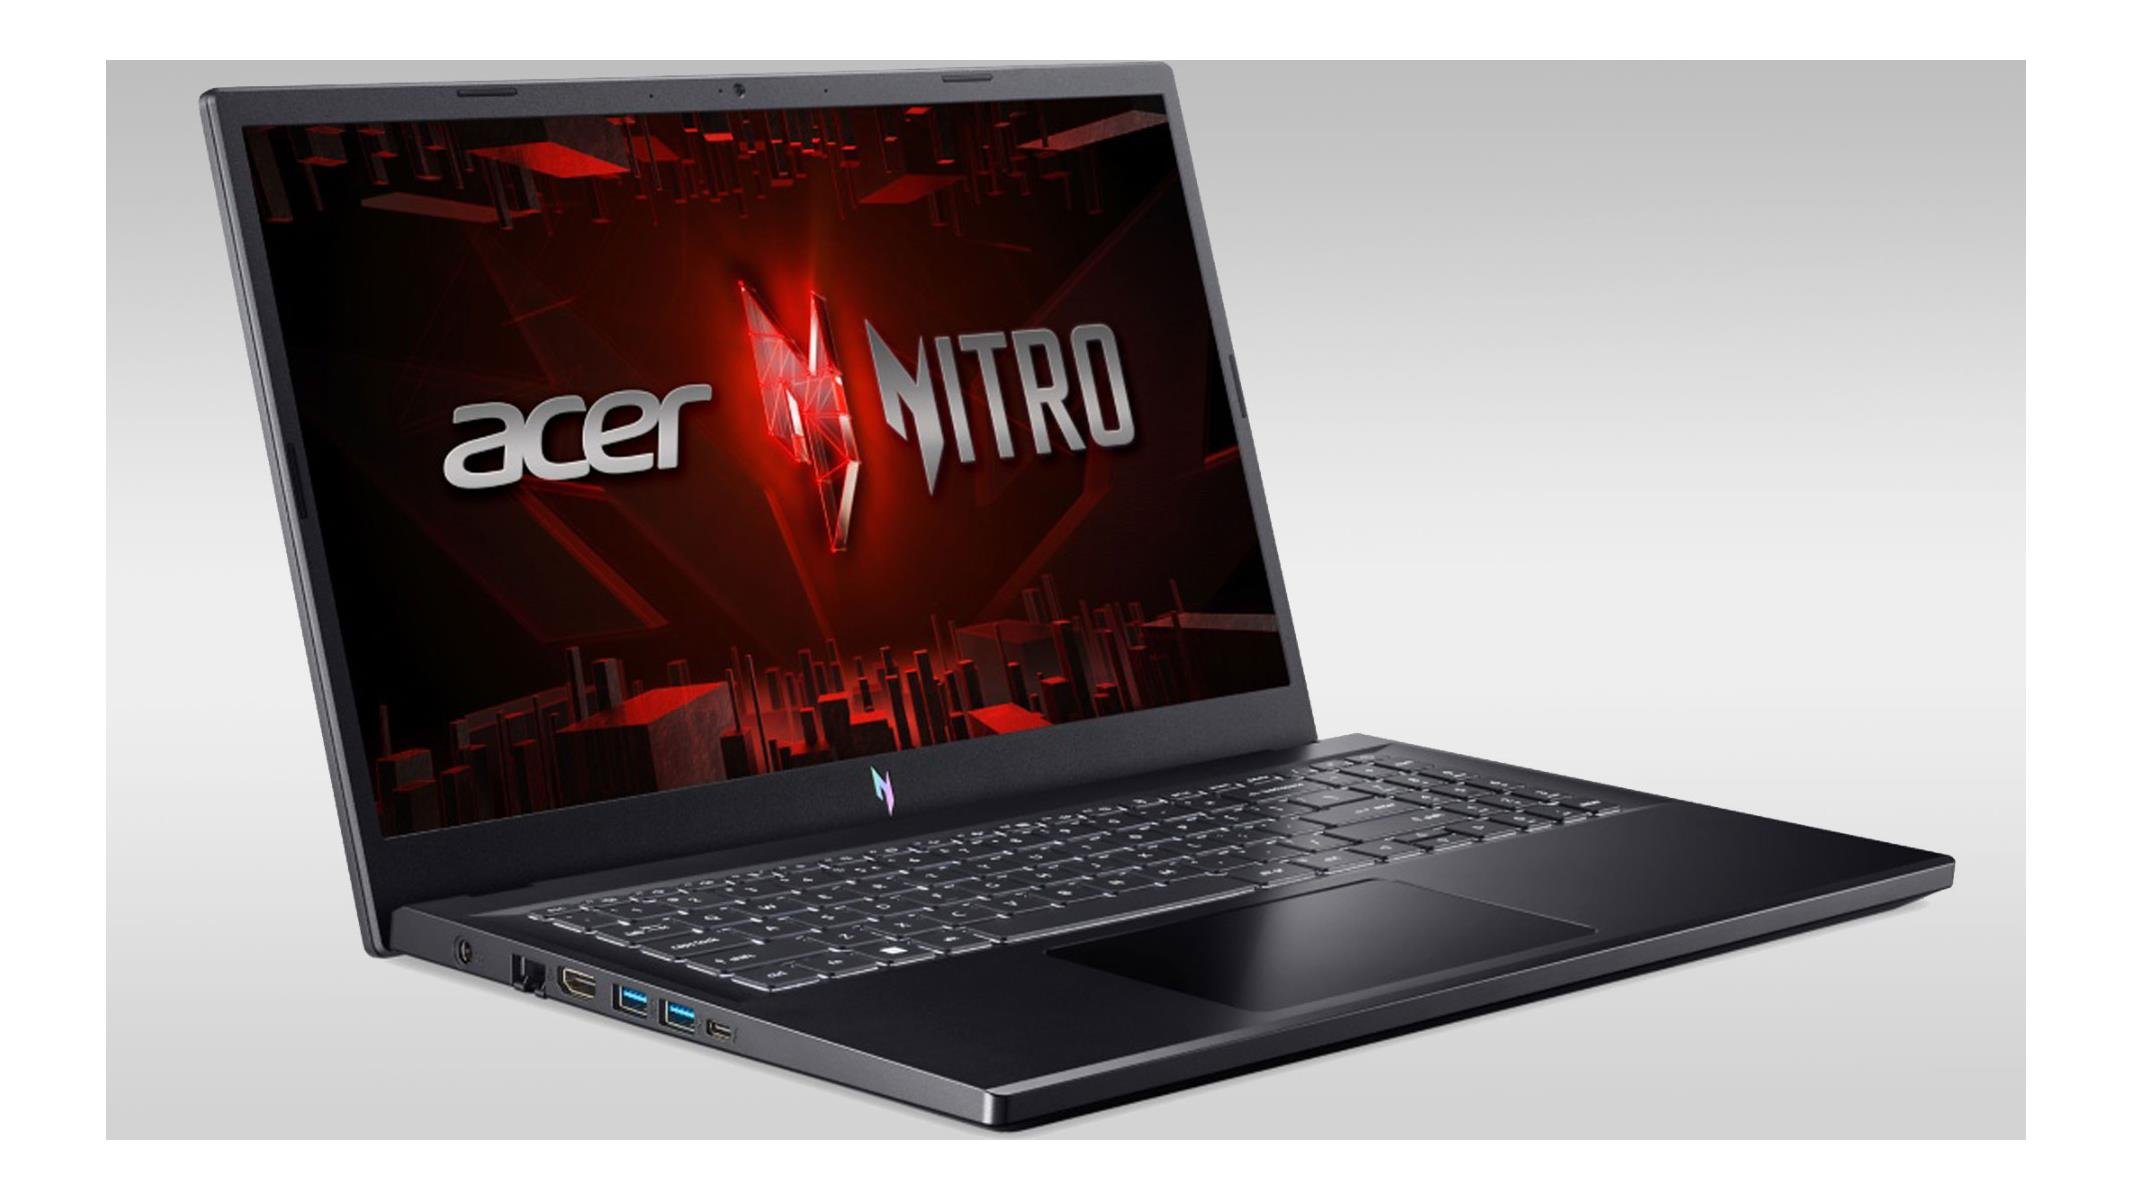 New Acer Nitro V 15 Laptop Makes Gaming More Accessible